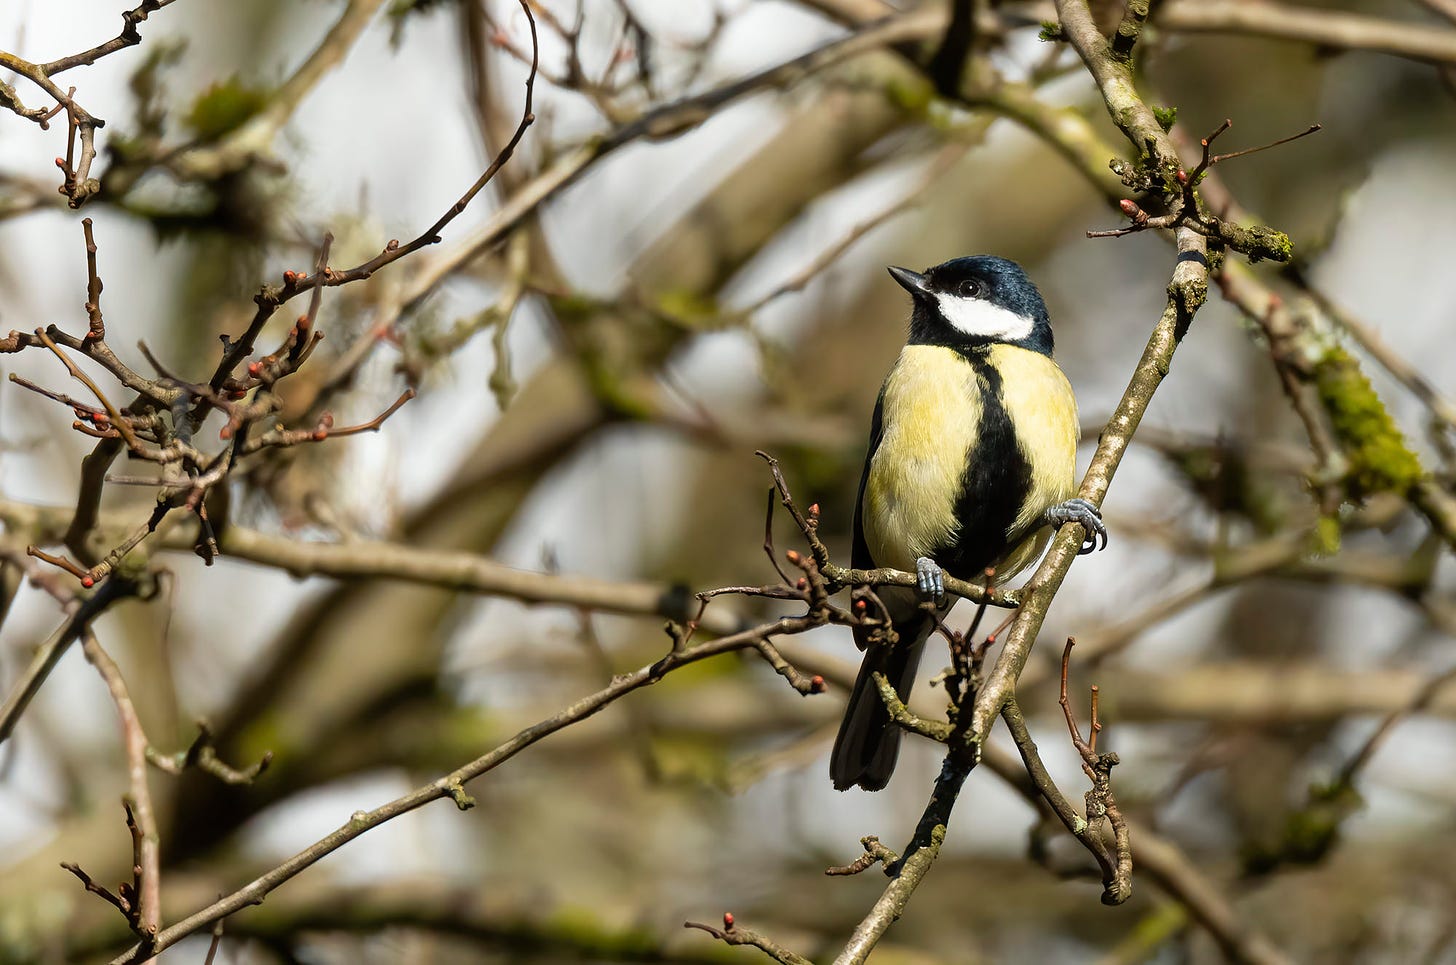 Great tit perched on a branch, photographed by Rhiannon Law